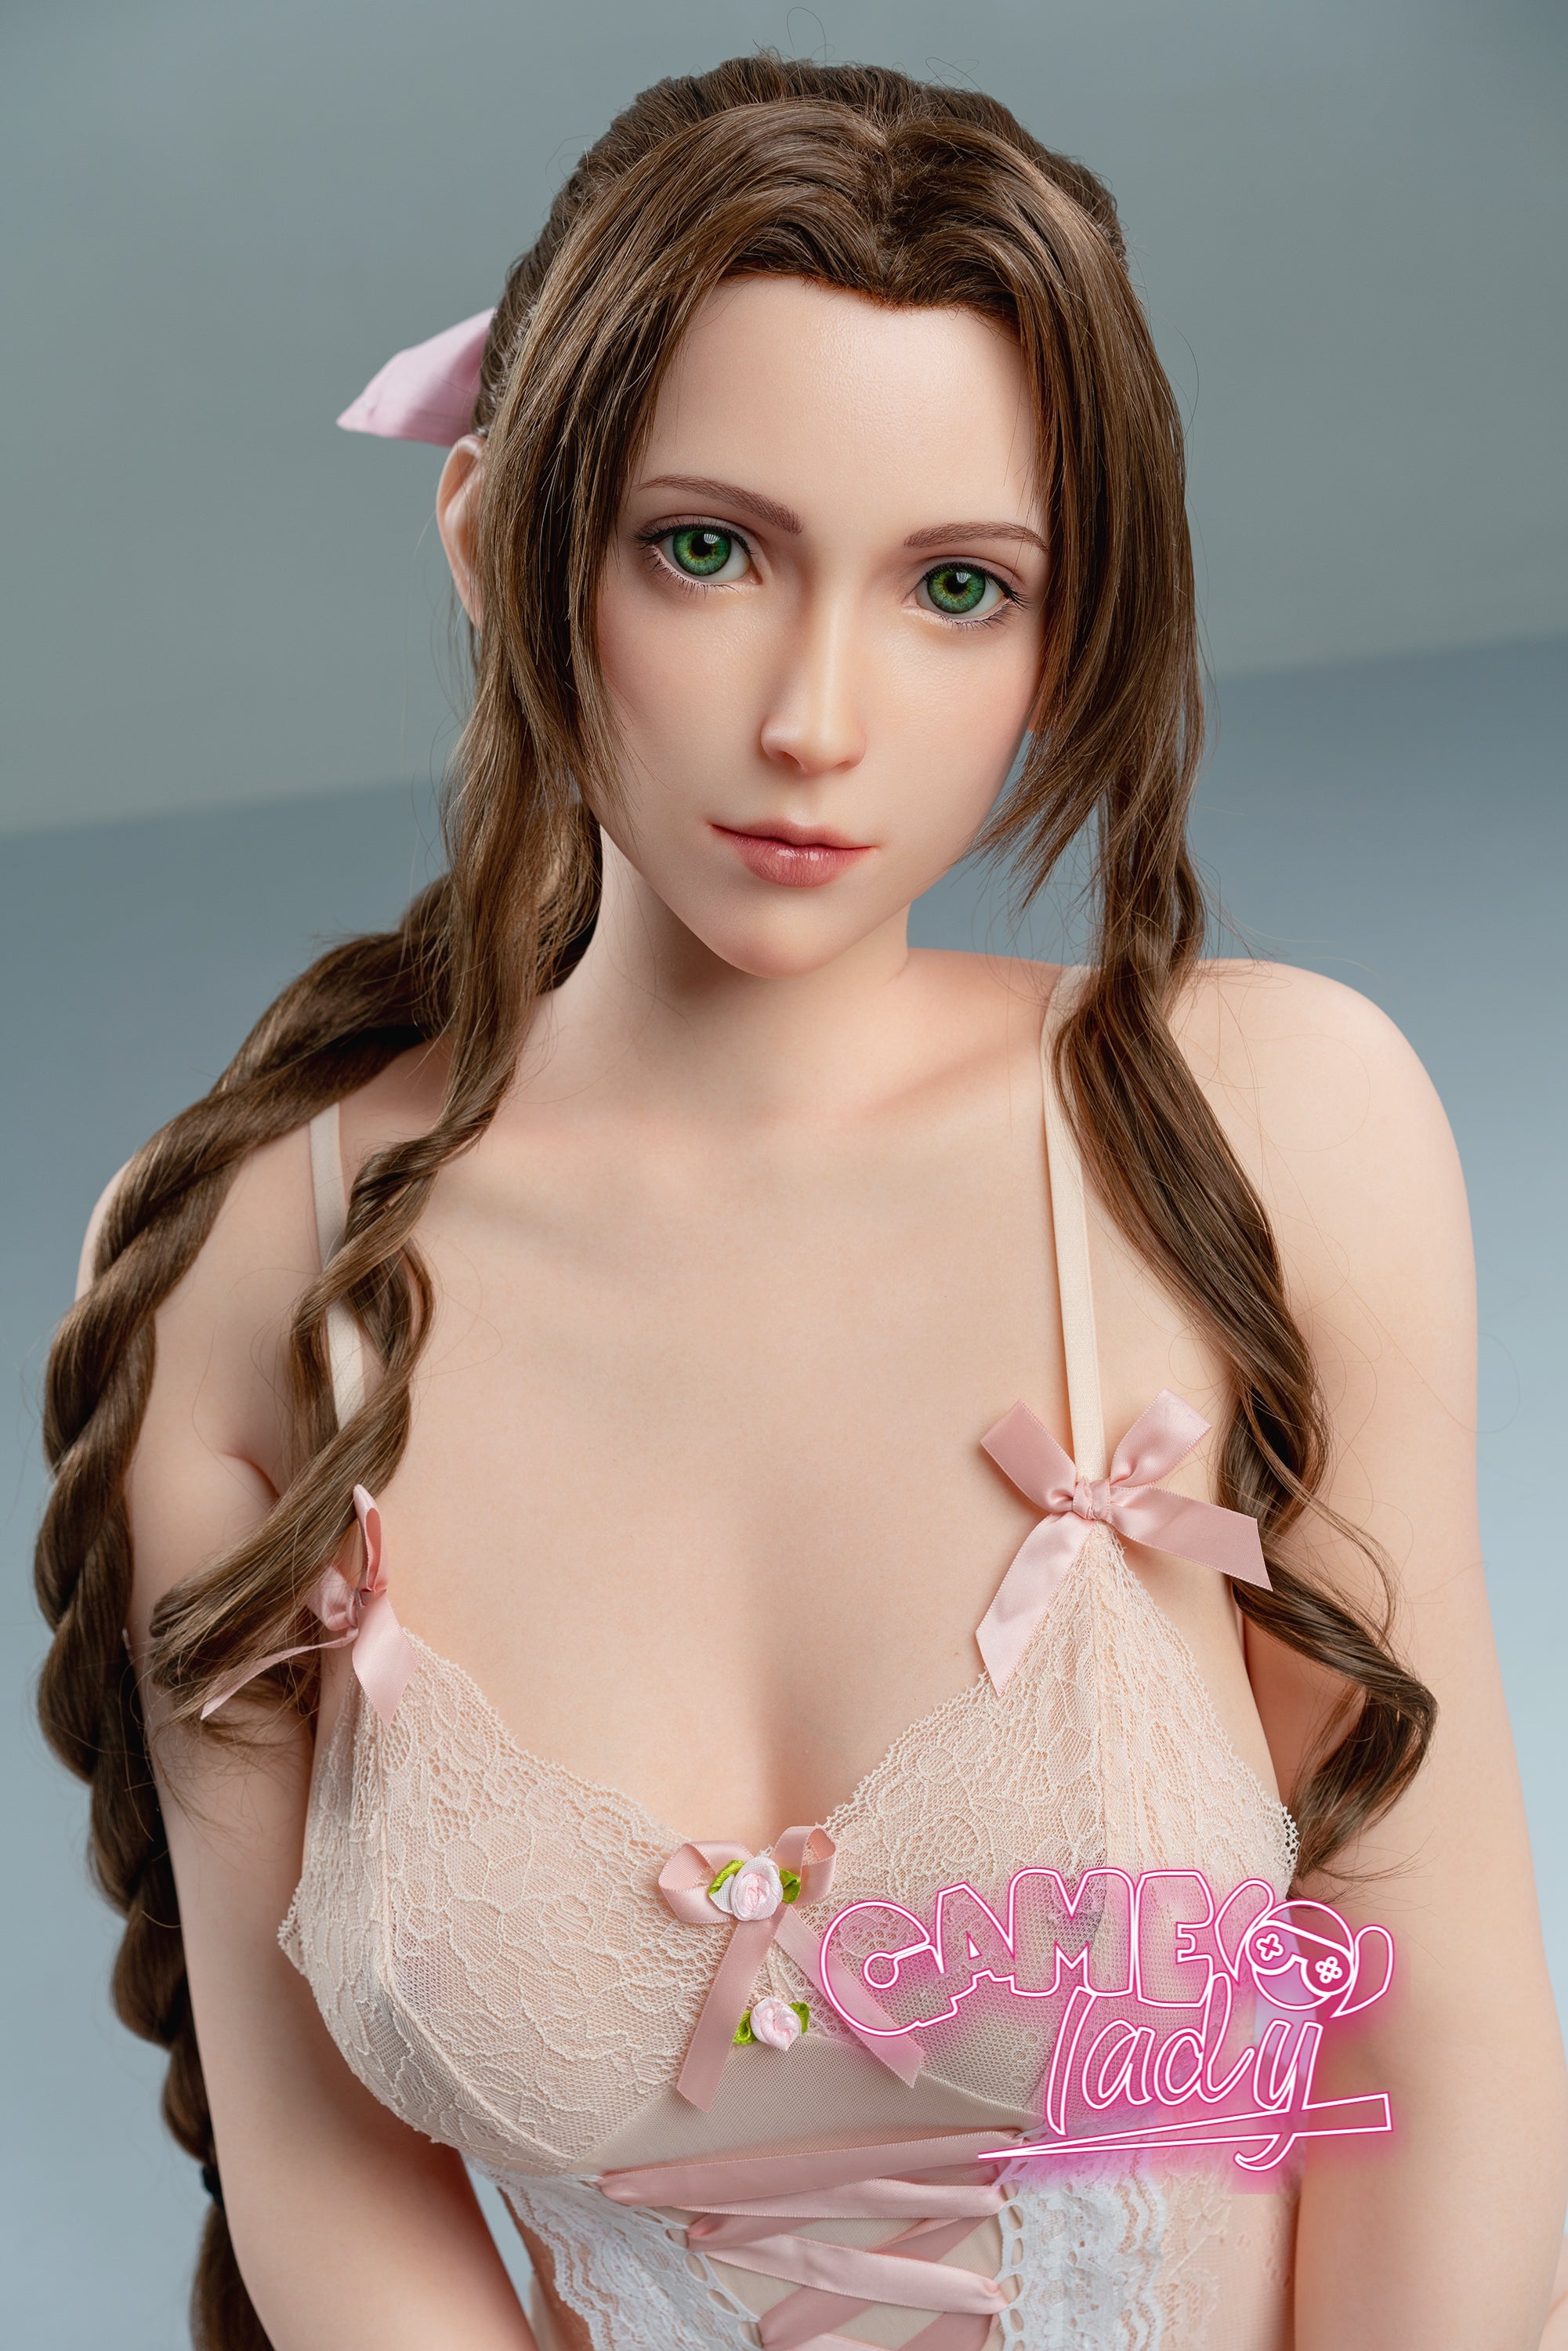 Game Lady 168 cm Silicone - Aerith | Buy Sex Dolls at DOLLS ACTUALLY